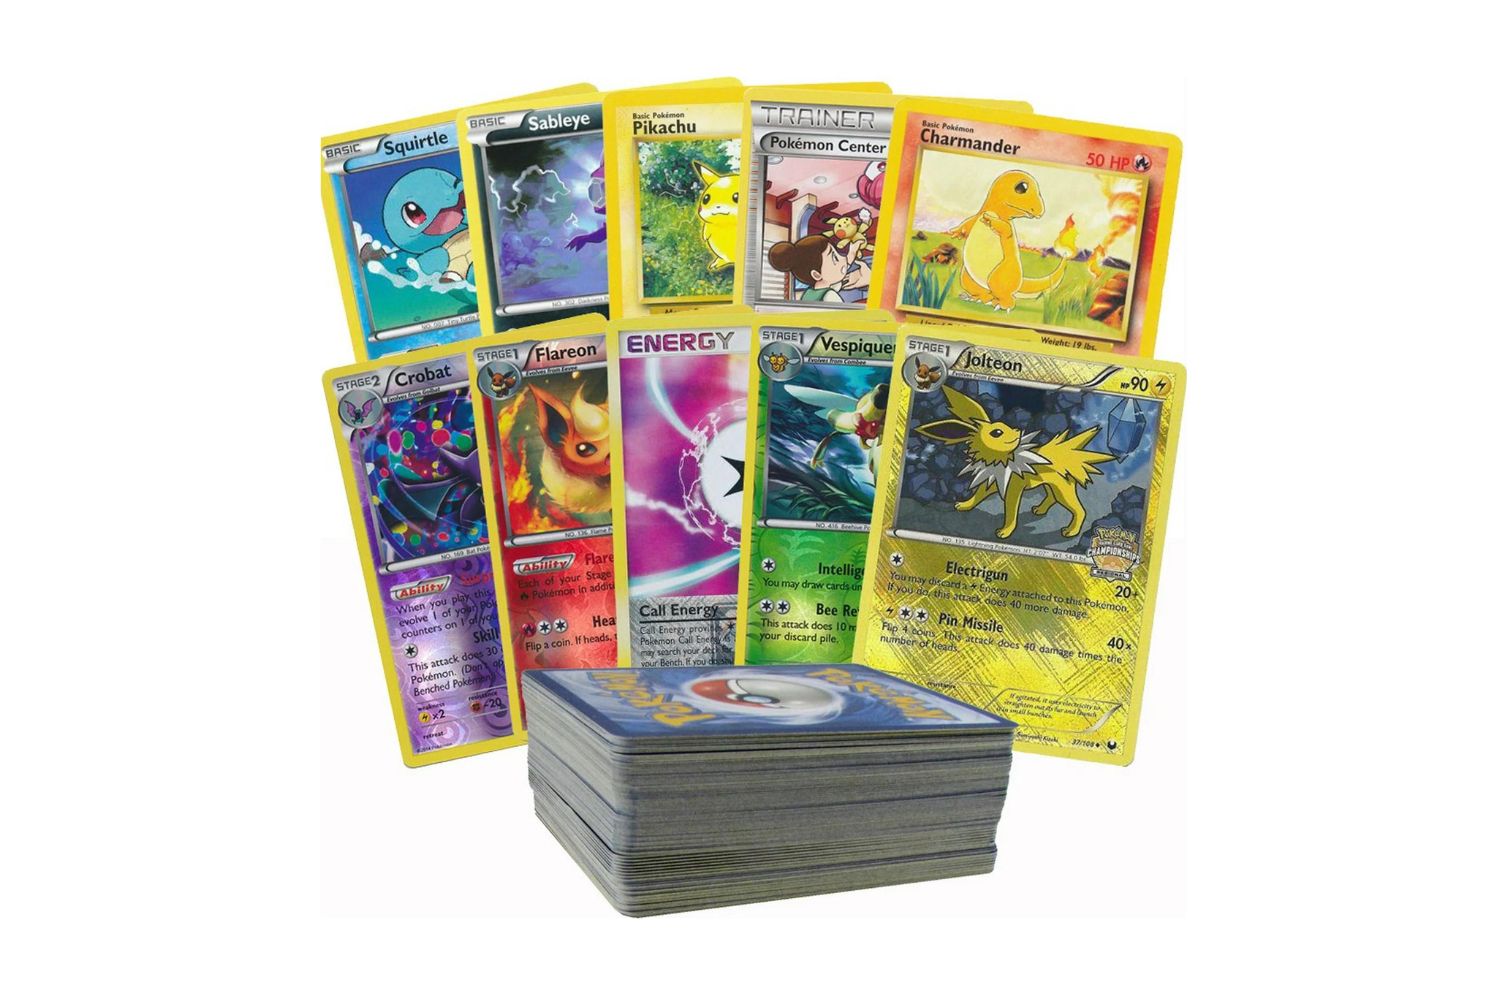 16-extraordinary-facts-about-walmart-pokemon-cards